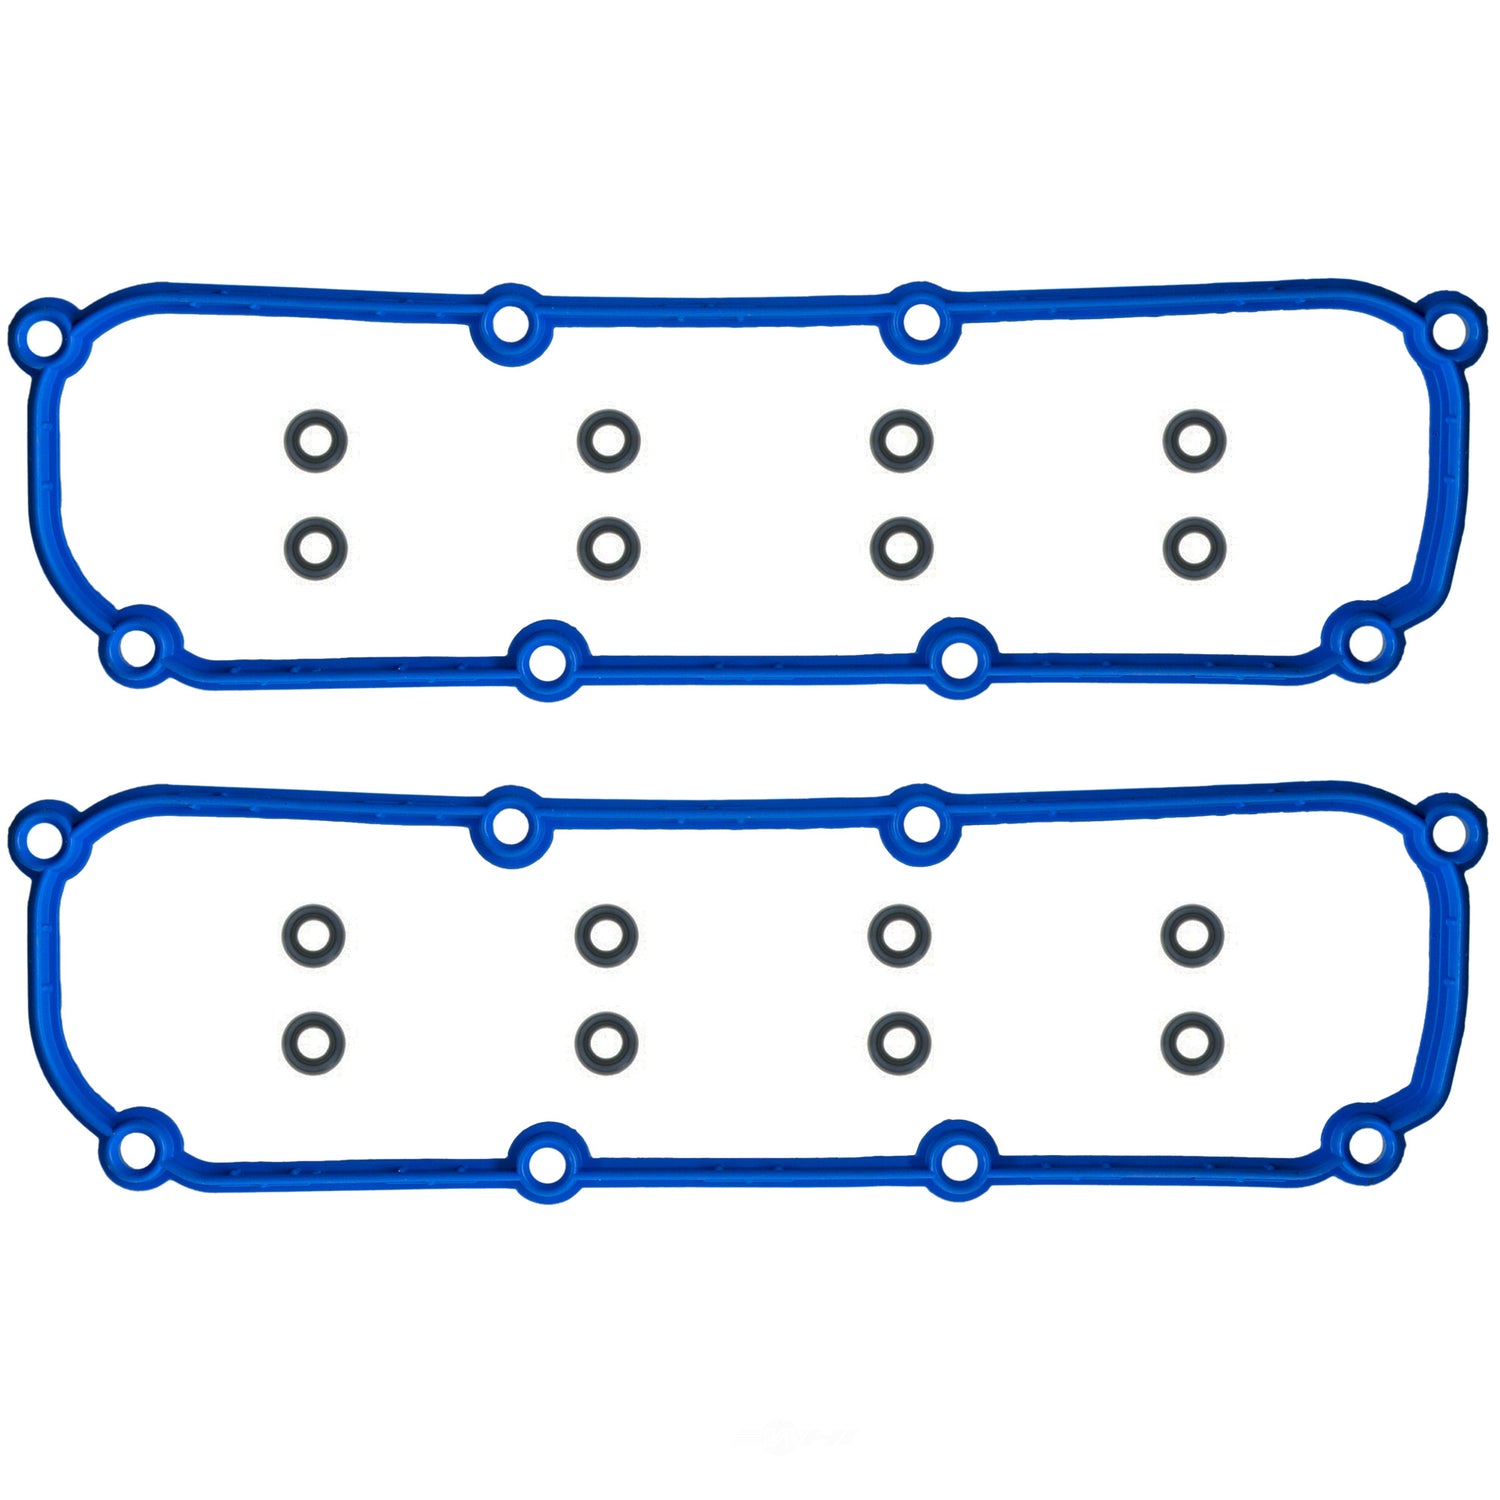 Compatible with Chrysler Town ＆ Country Dodge Grand Caravan Engine Valve Cover Gasket Set - 2